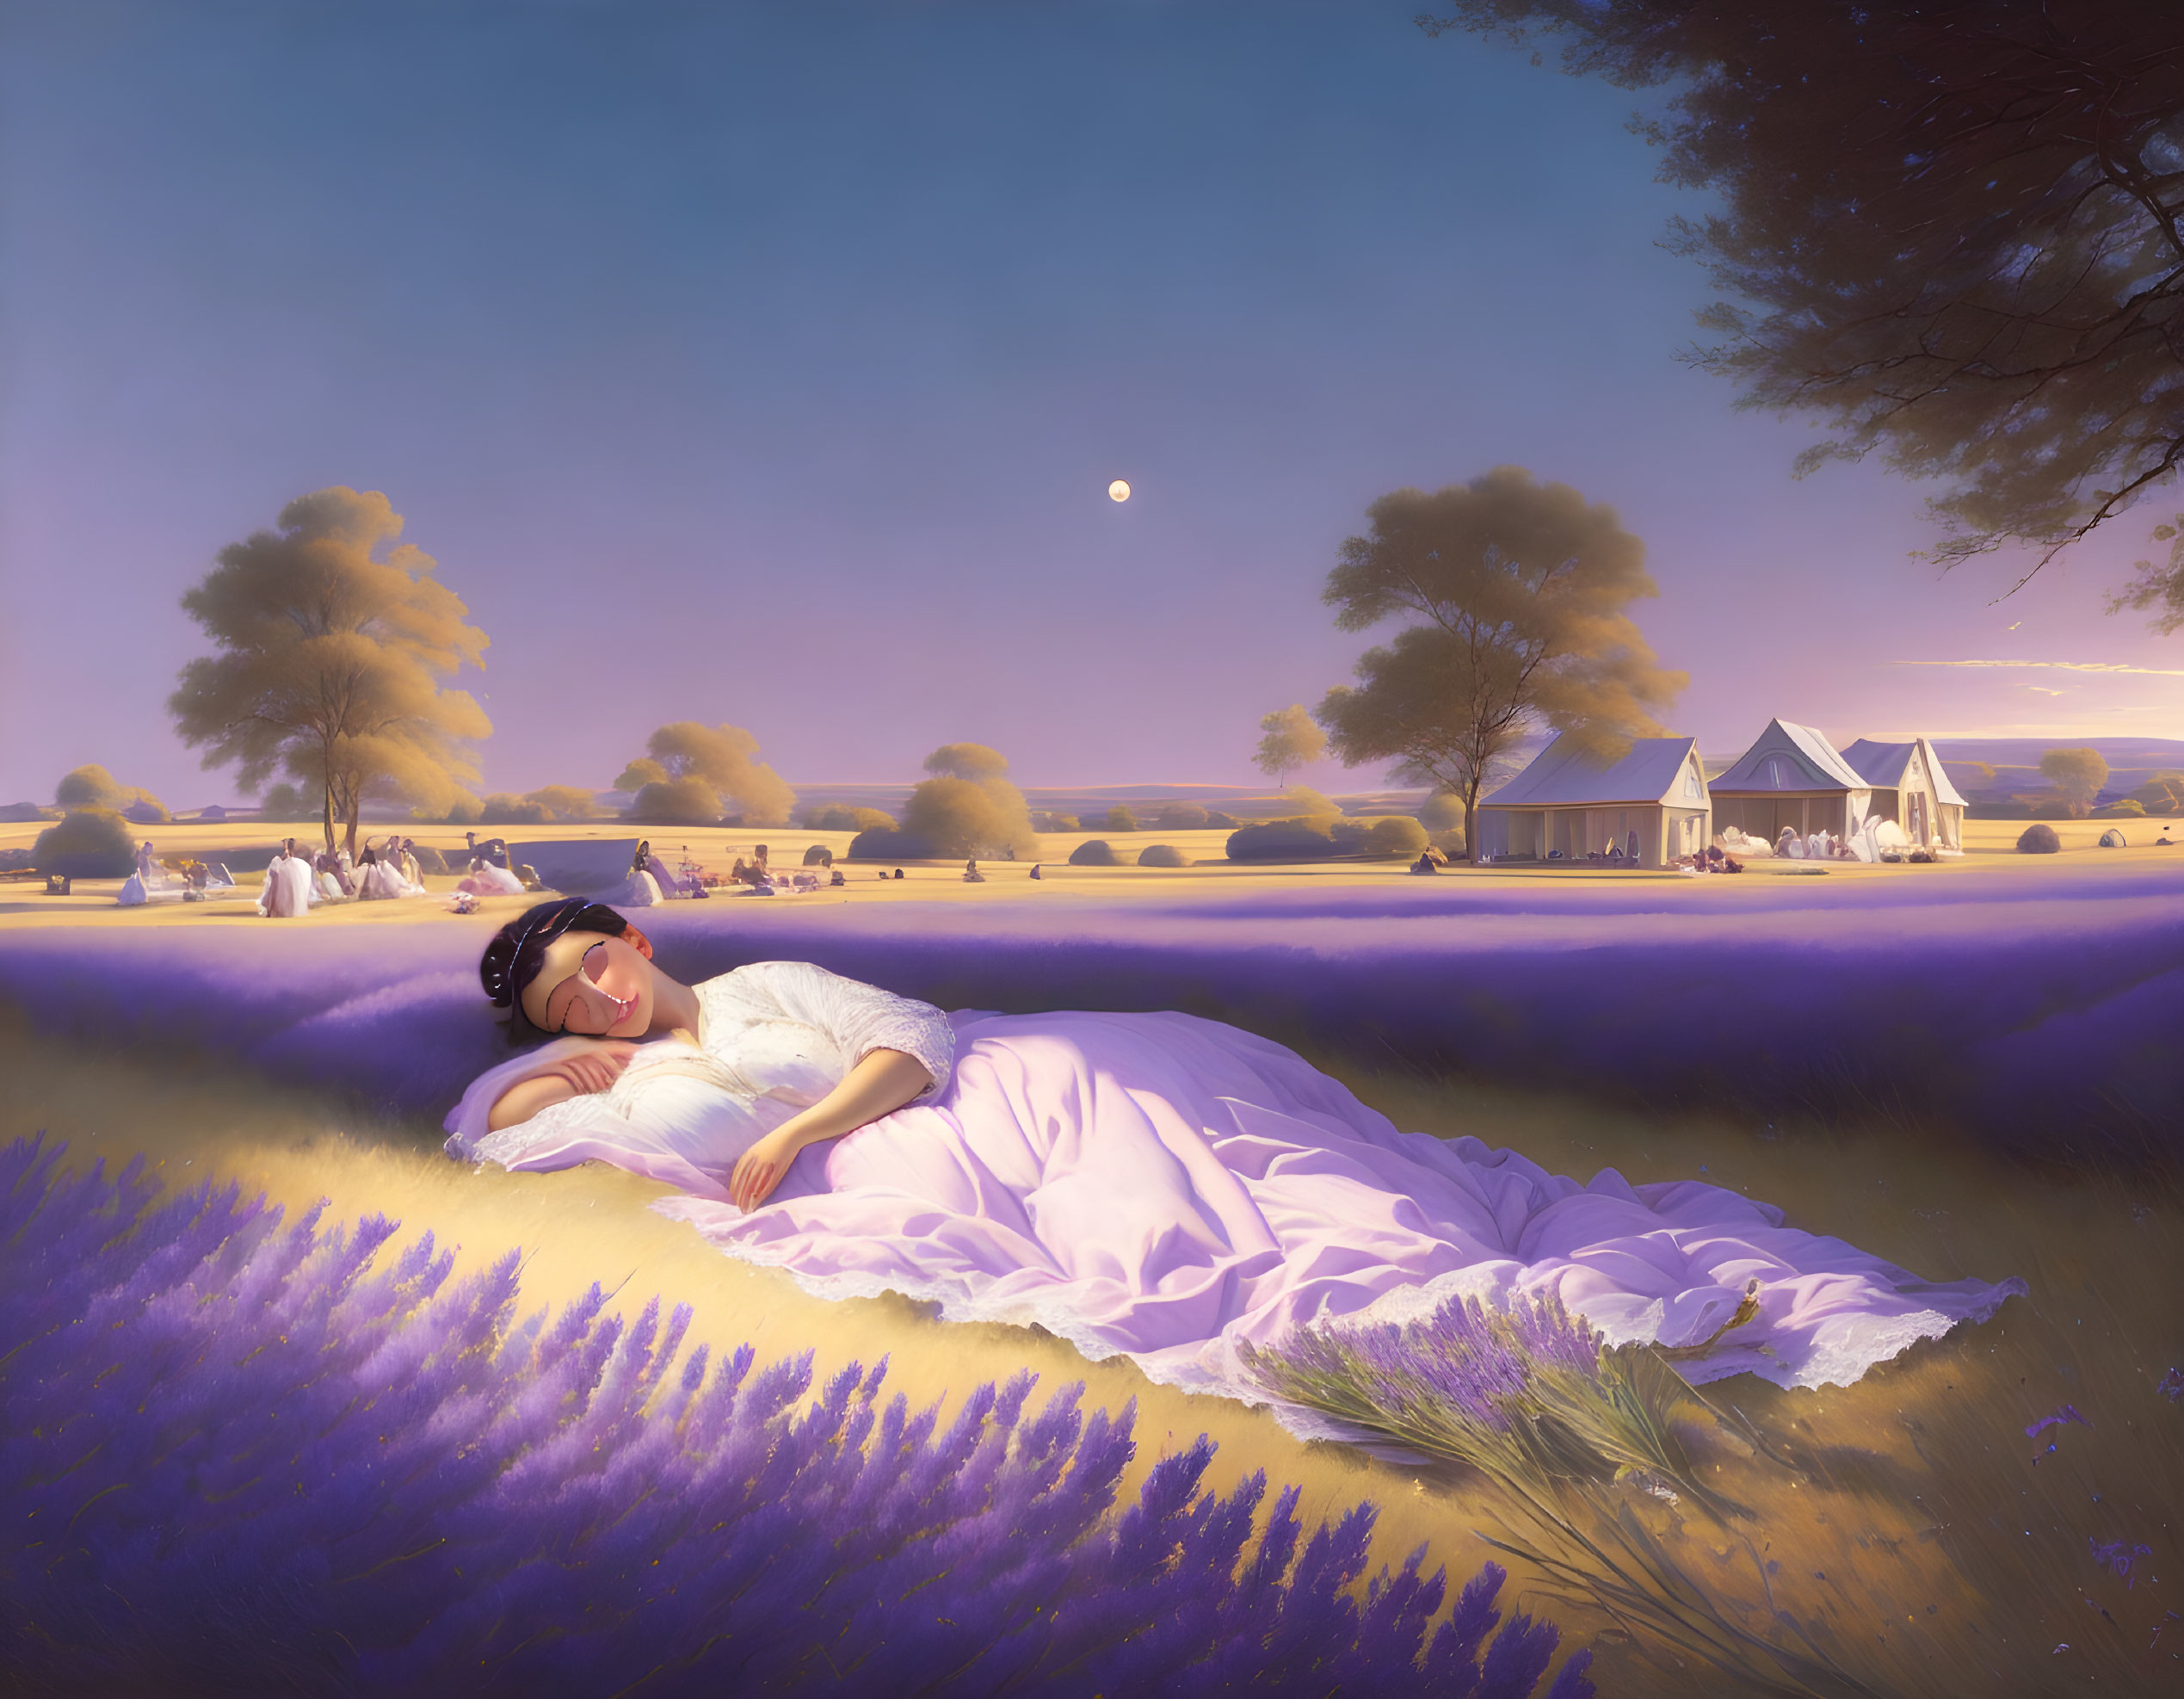 Woman reclining in lavender field at dusk with farmhouse, trees, and moonlit sky